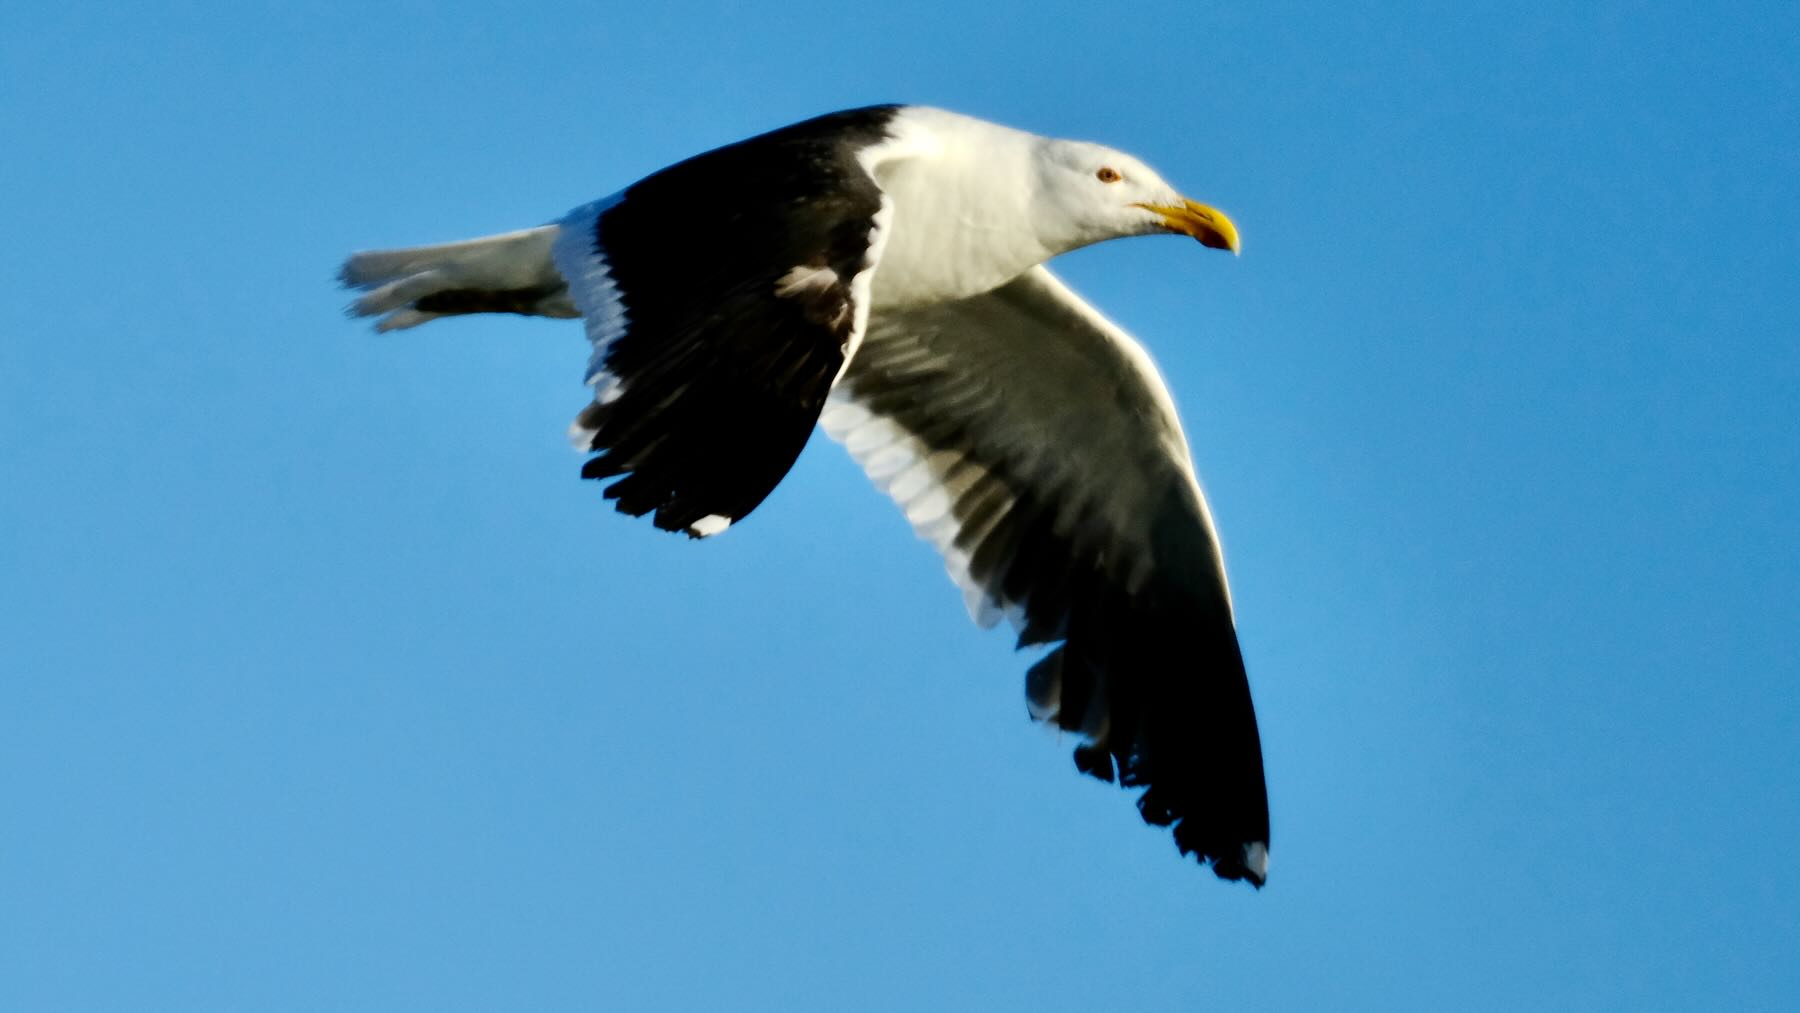 Black backed gull in flight with wings down. 